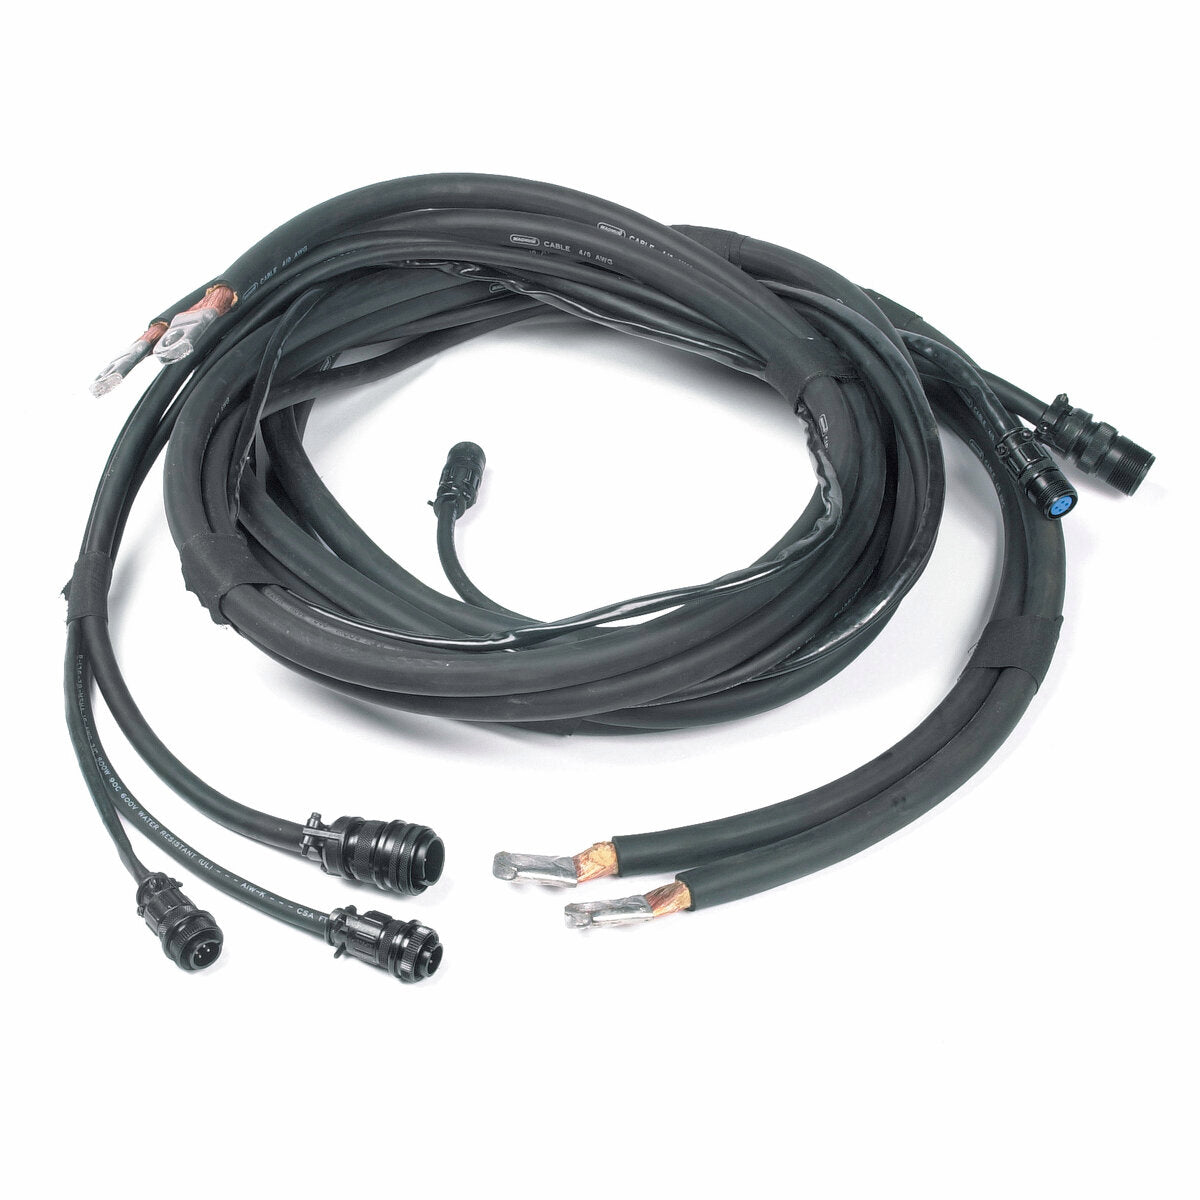 Lincoln Electric - Control to Head Extension Cable - 26 ft (8 m) - K335-26